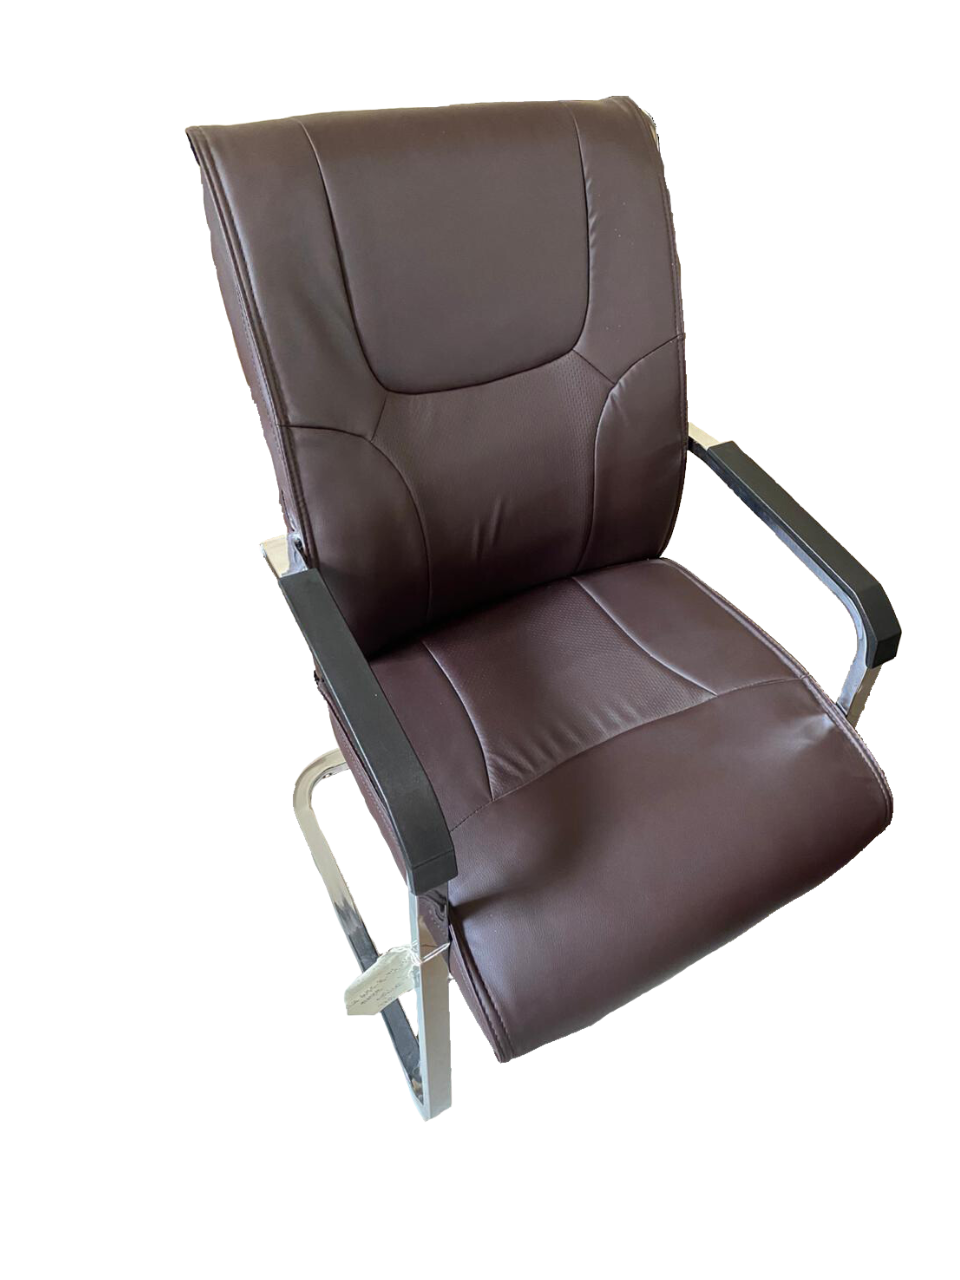 Visitor Chair - Model No.KP-B47- G | Buy Visitor Chairs Online